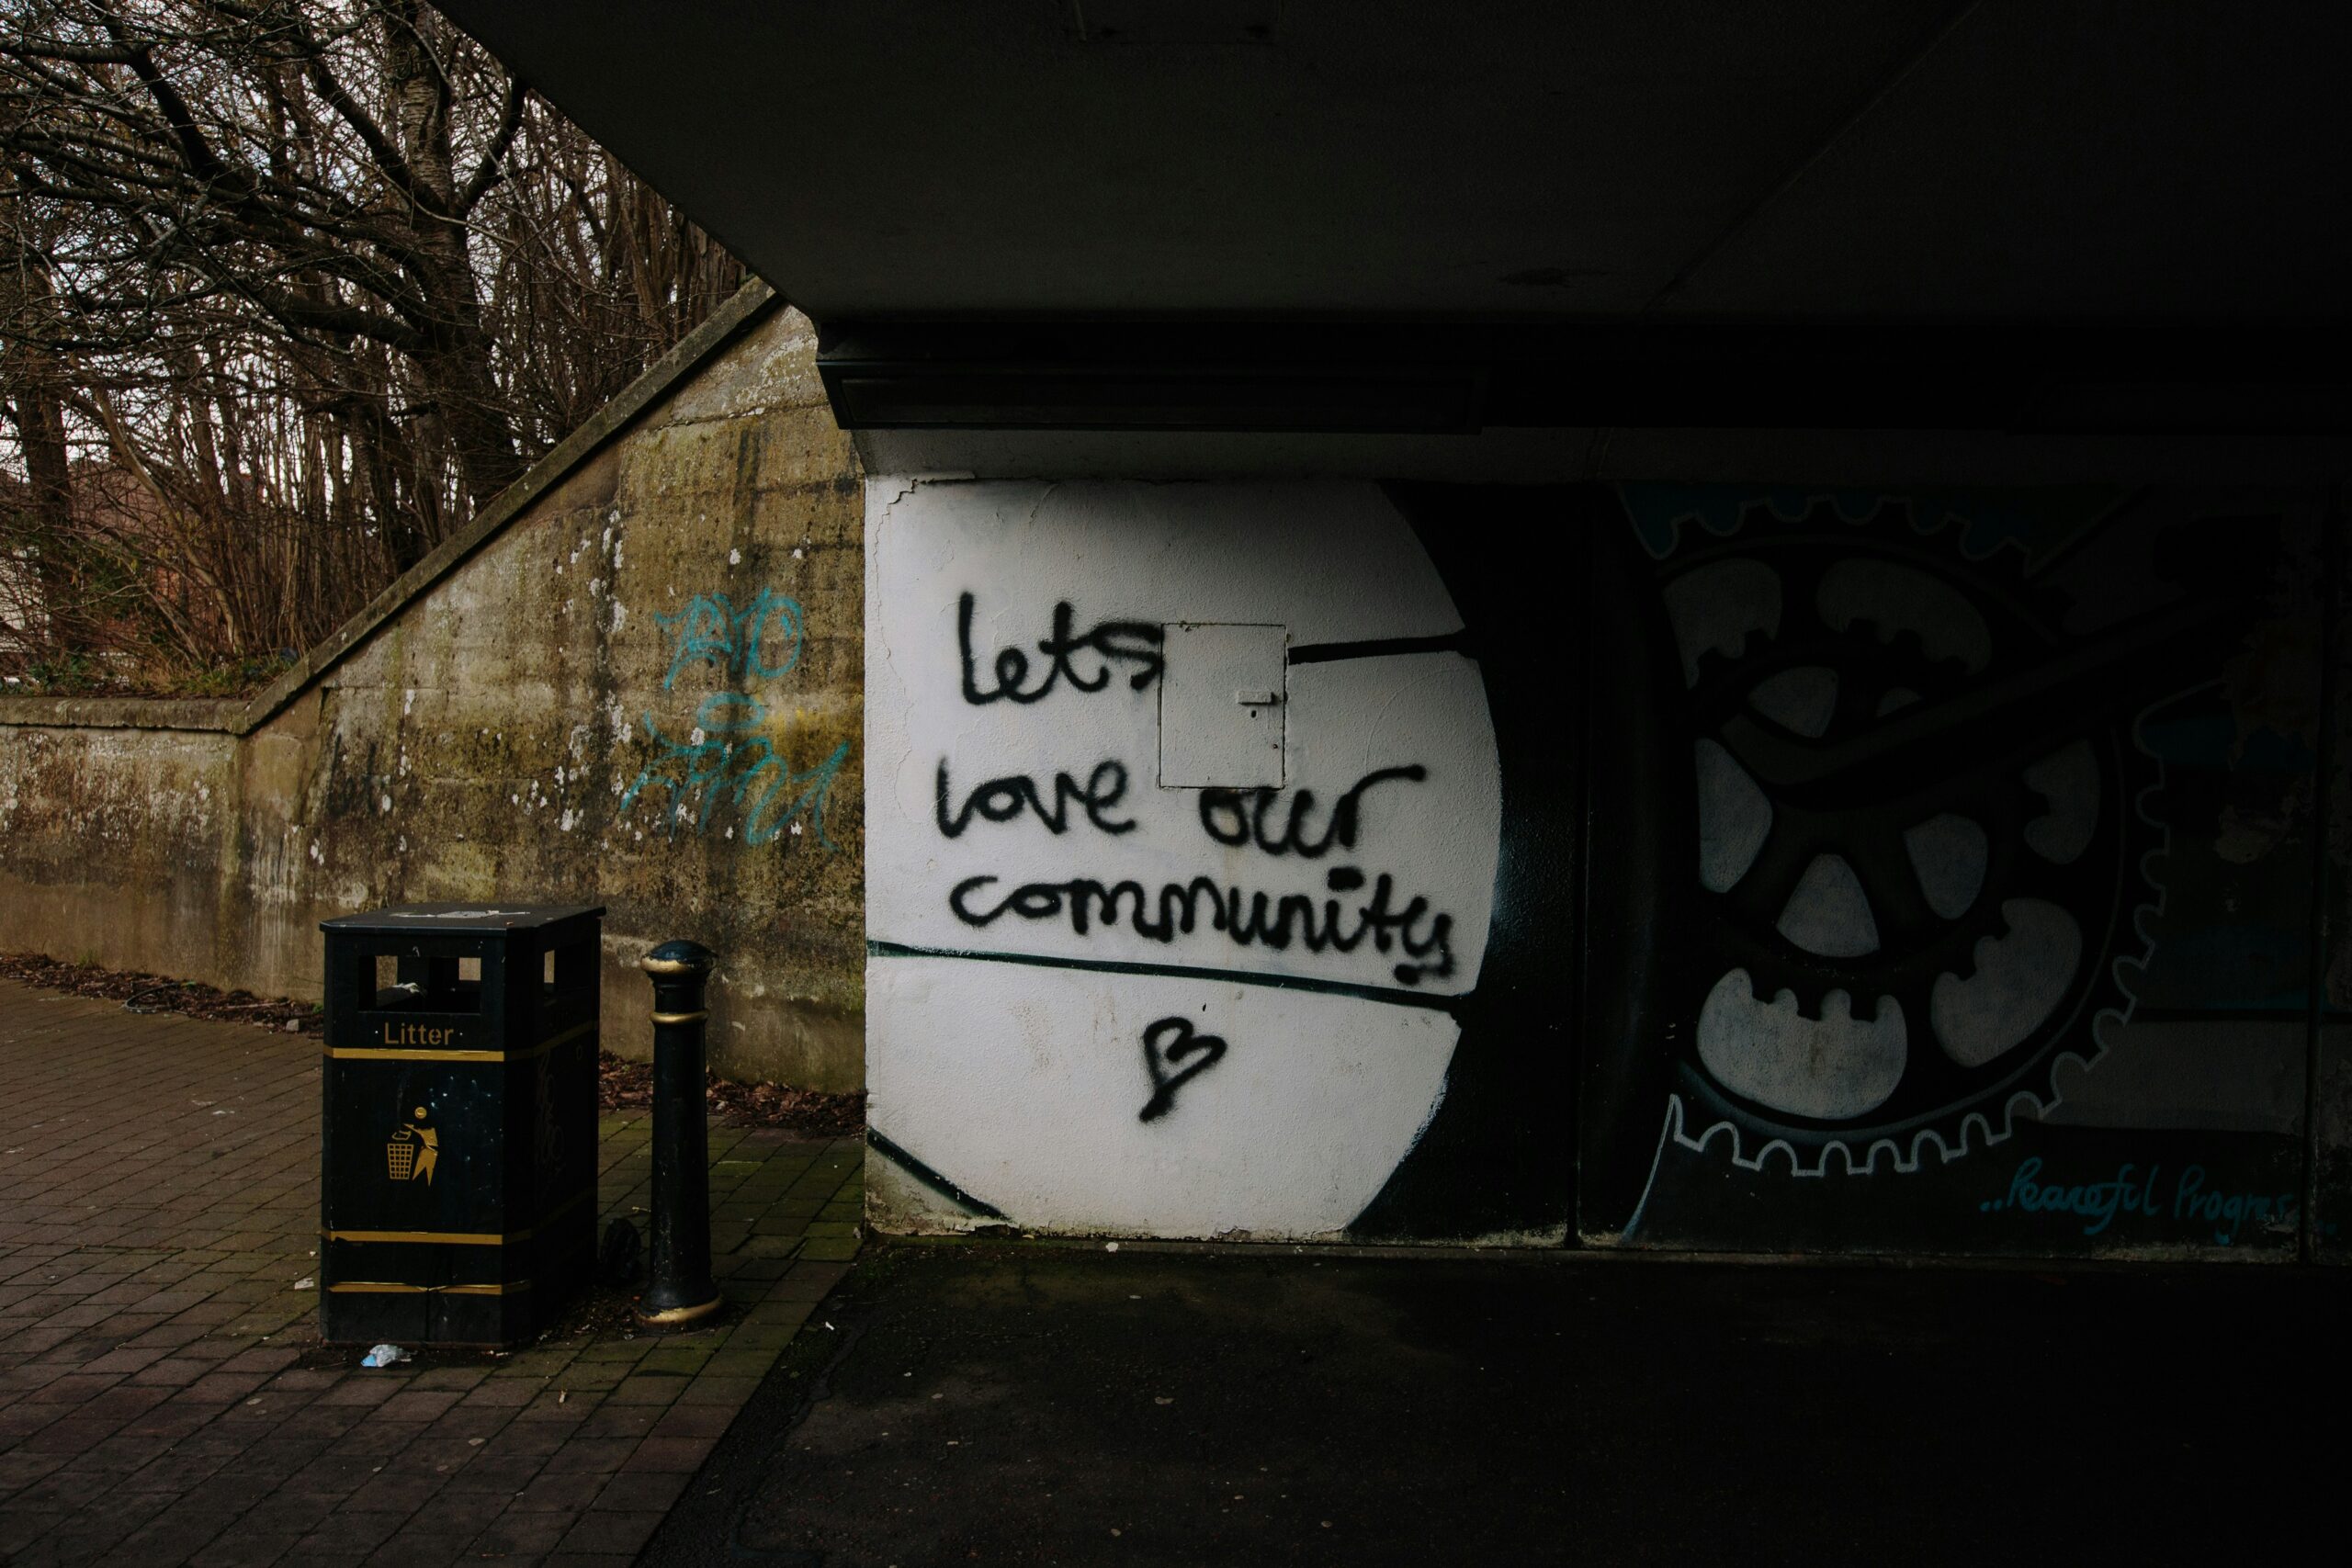 A dark road underpass has the message 'let's love our community' spray painted onto the wall